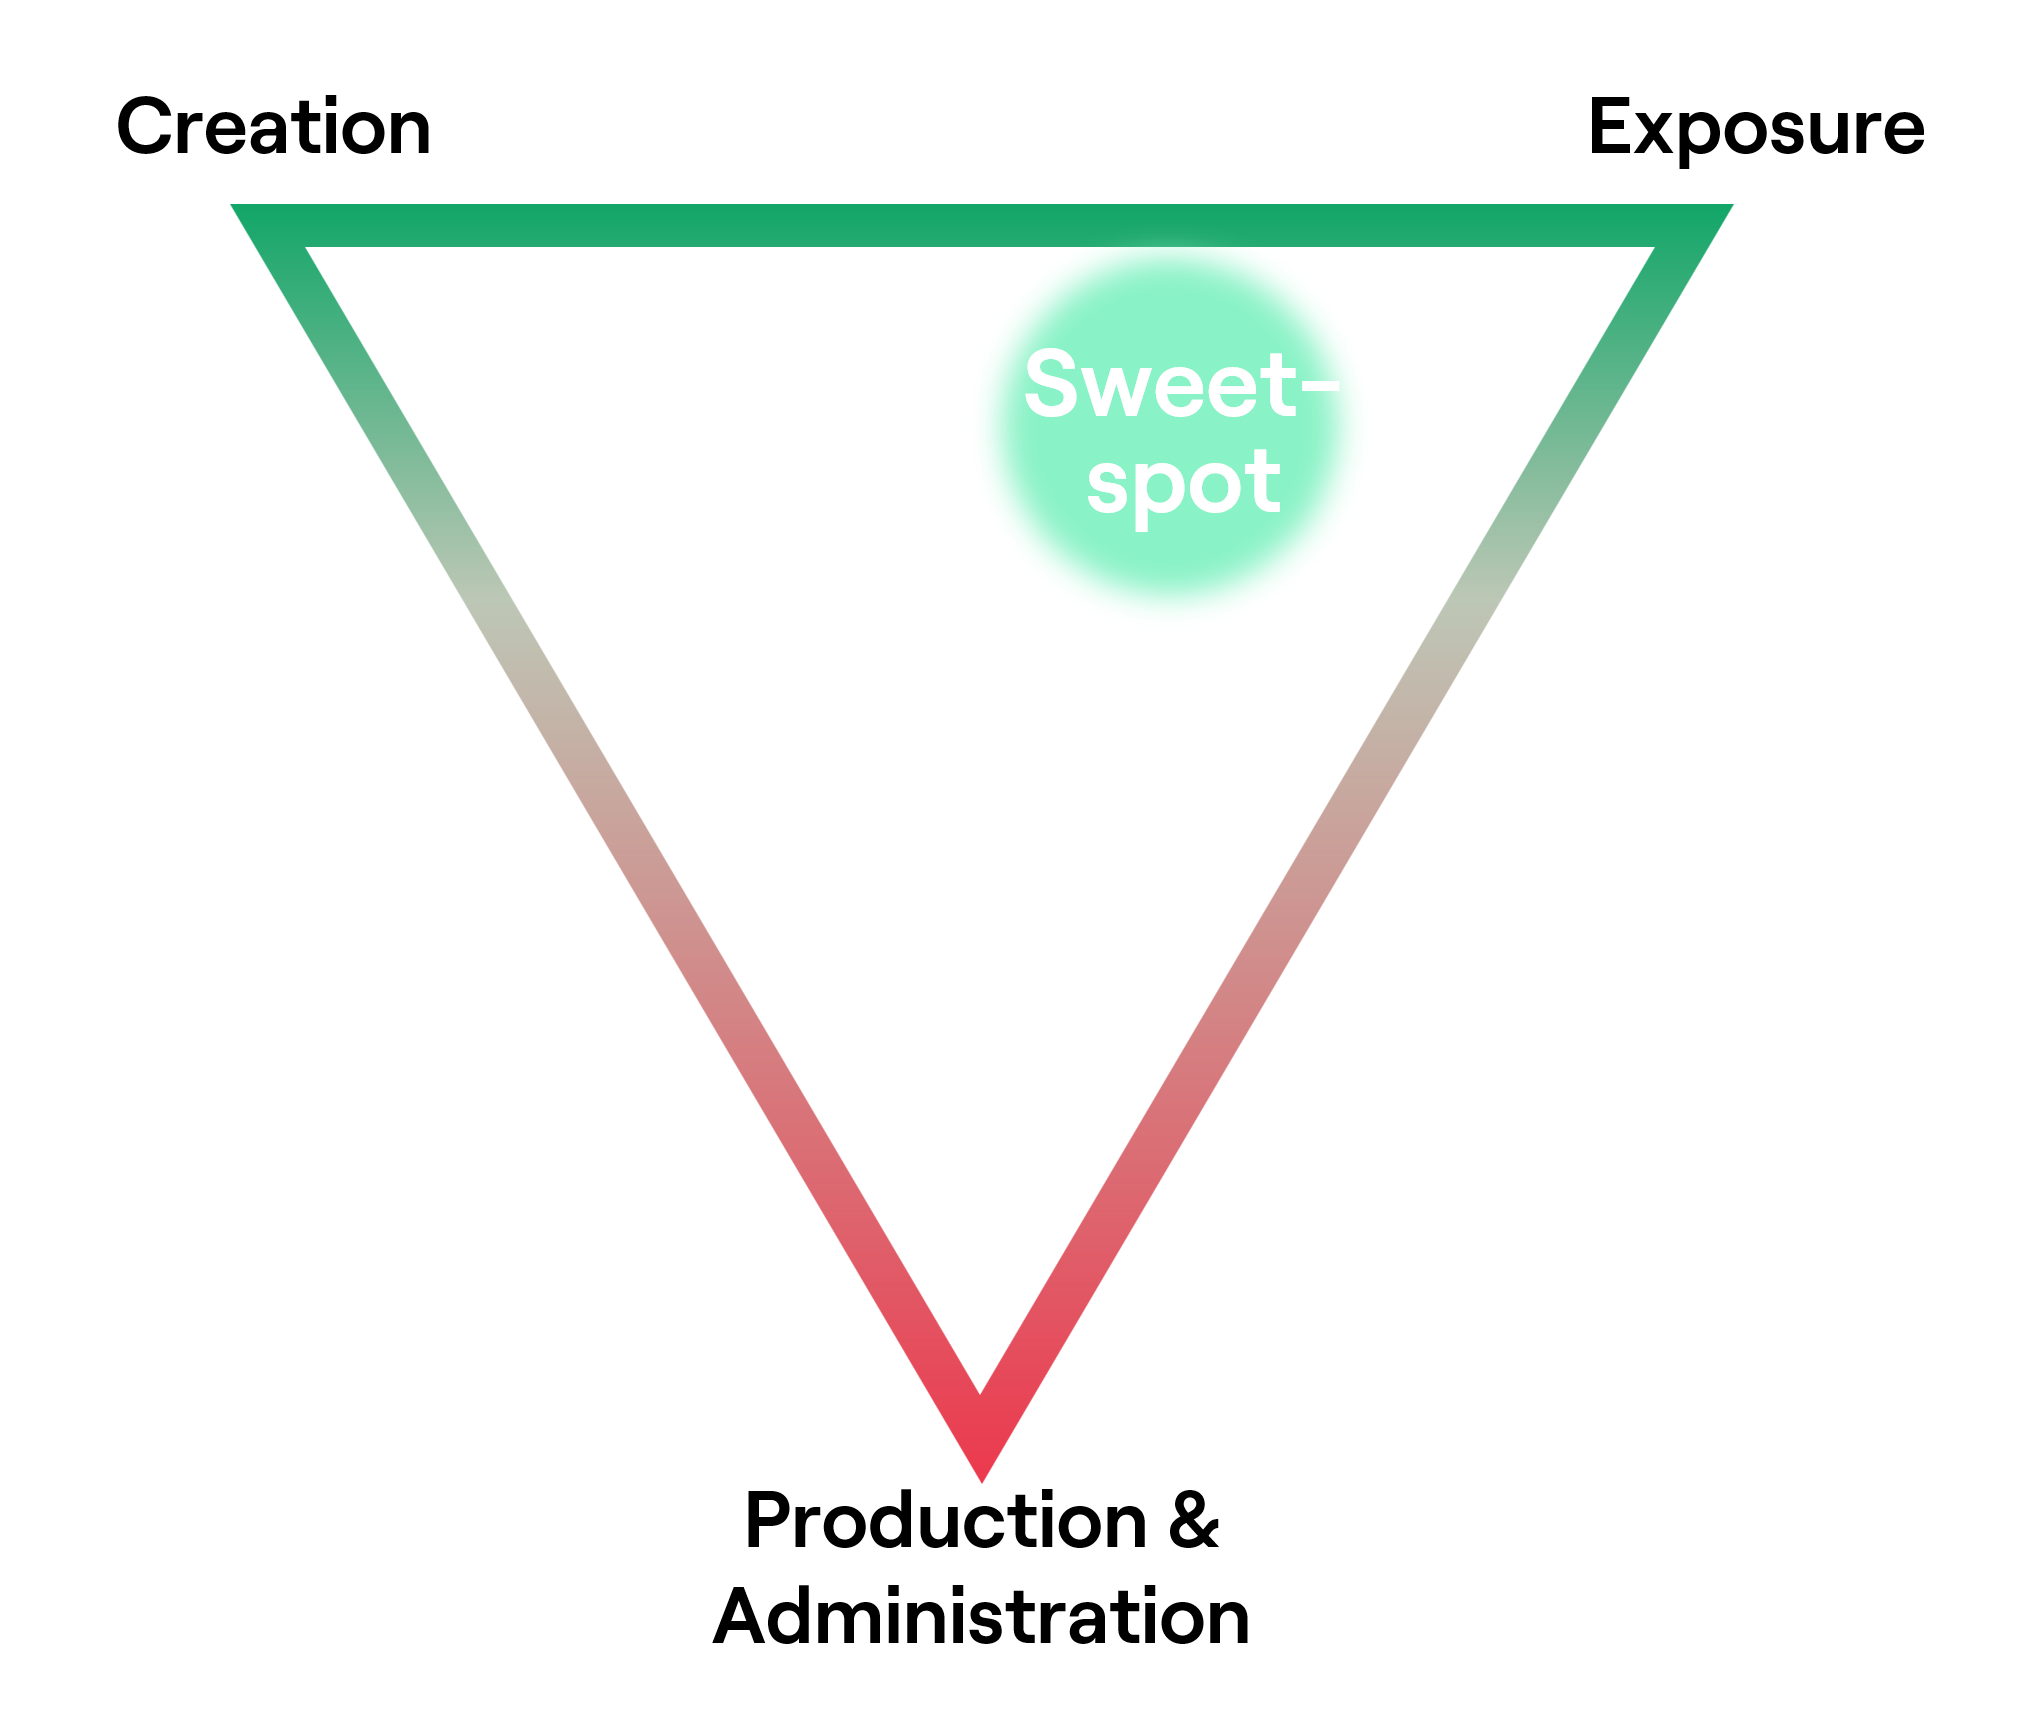 The sweet spot that you should reach to maximize marketing effectiveness.